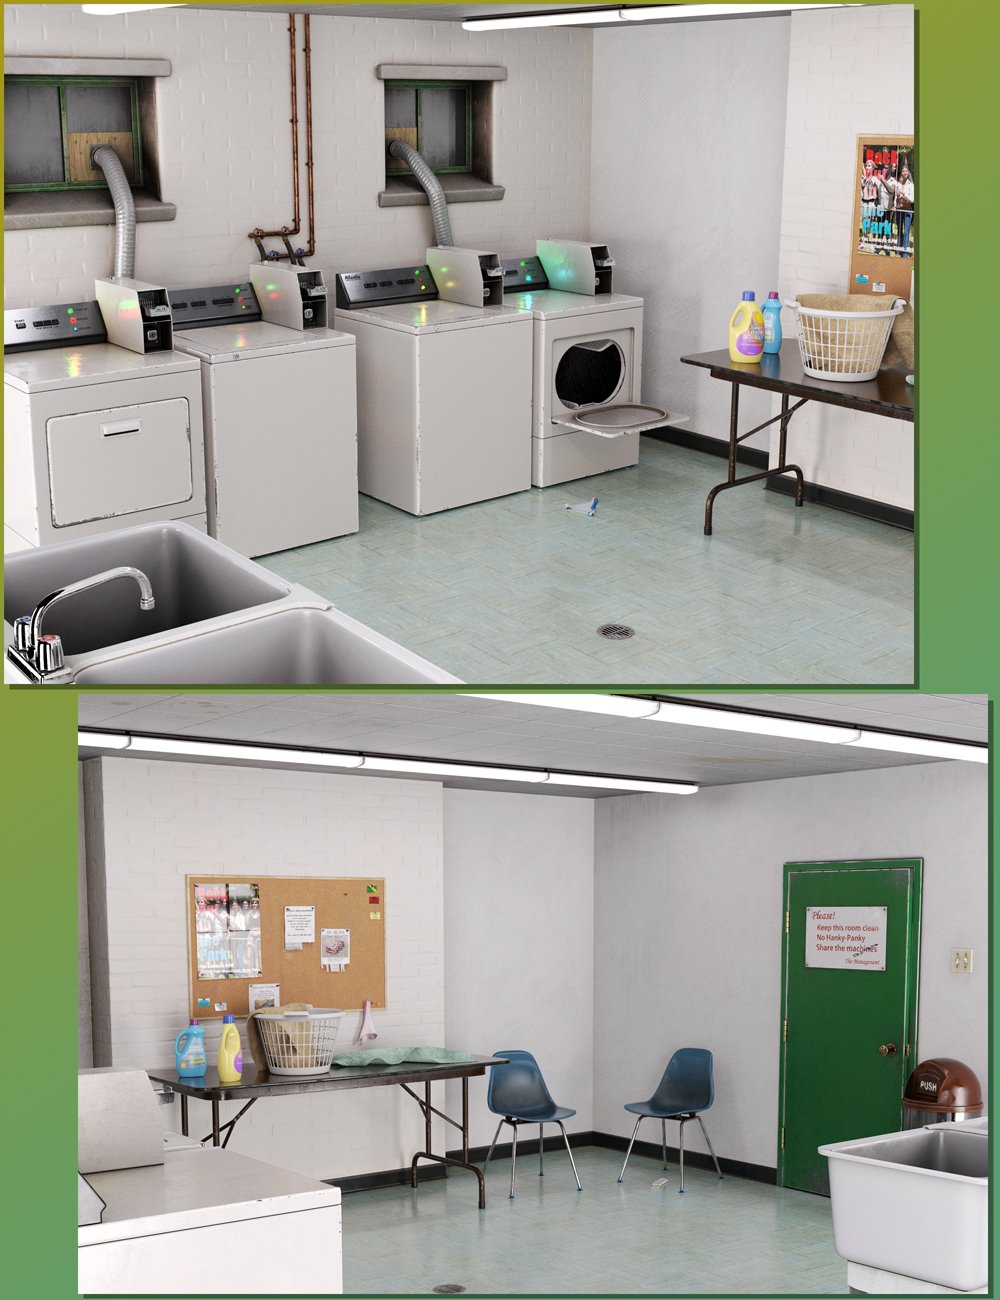 Apartment Laundry Room by: Rascal3D, 3D Models by Daz 3D